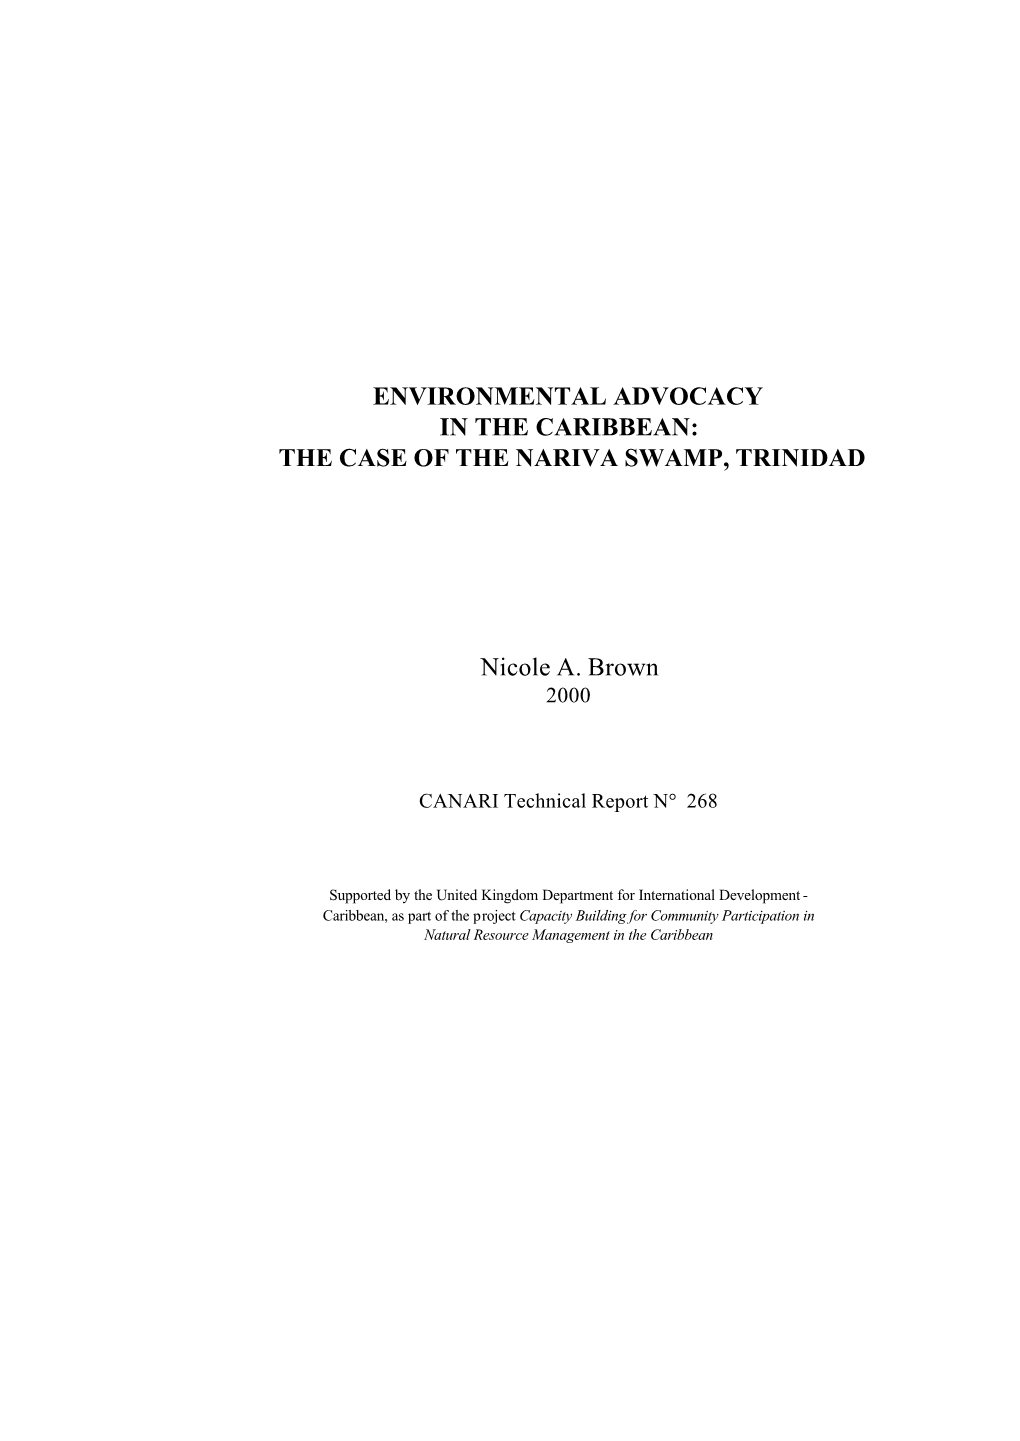 Environmental Advocacy in the Caribbean: the Case of the Nariva Swamp, Trinidad